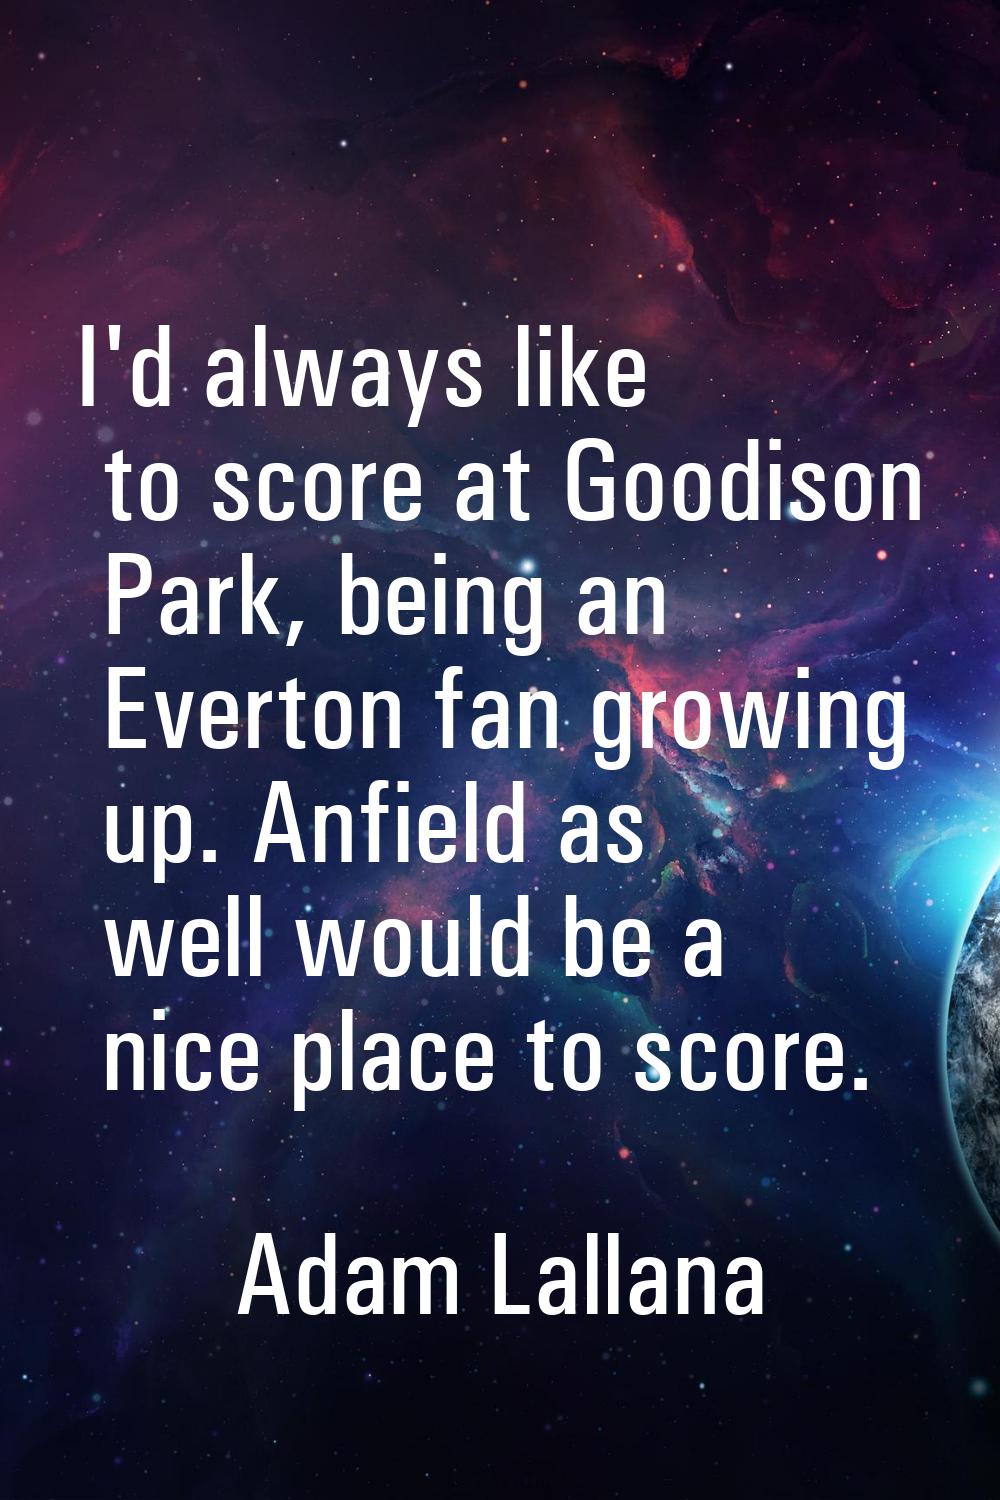 I'd always like to score at Goodison Park, being an Everton fan growing up. Anfield as well would b